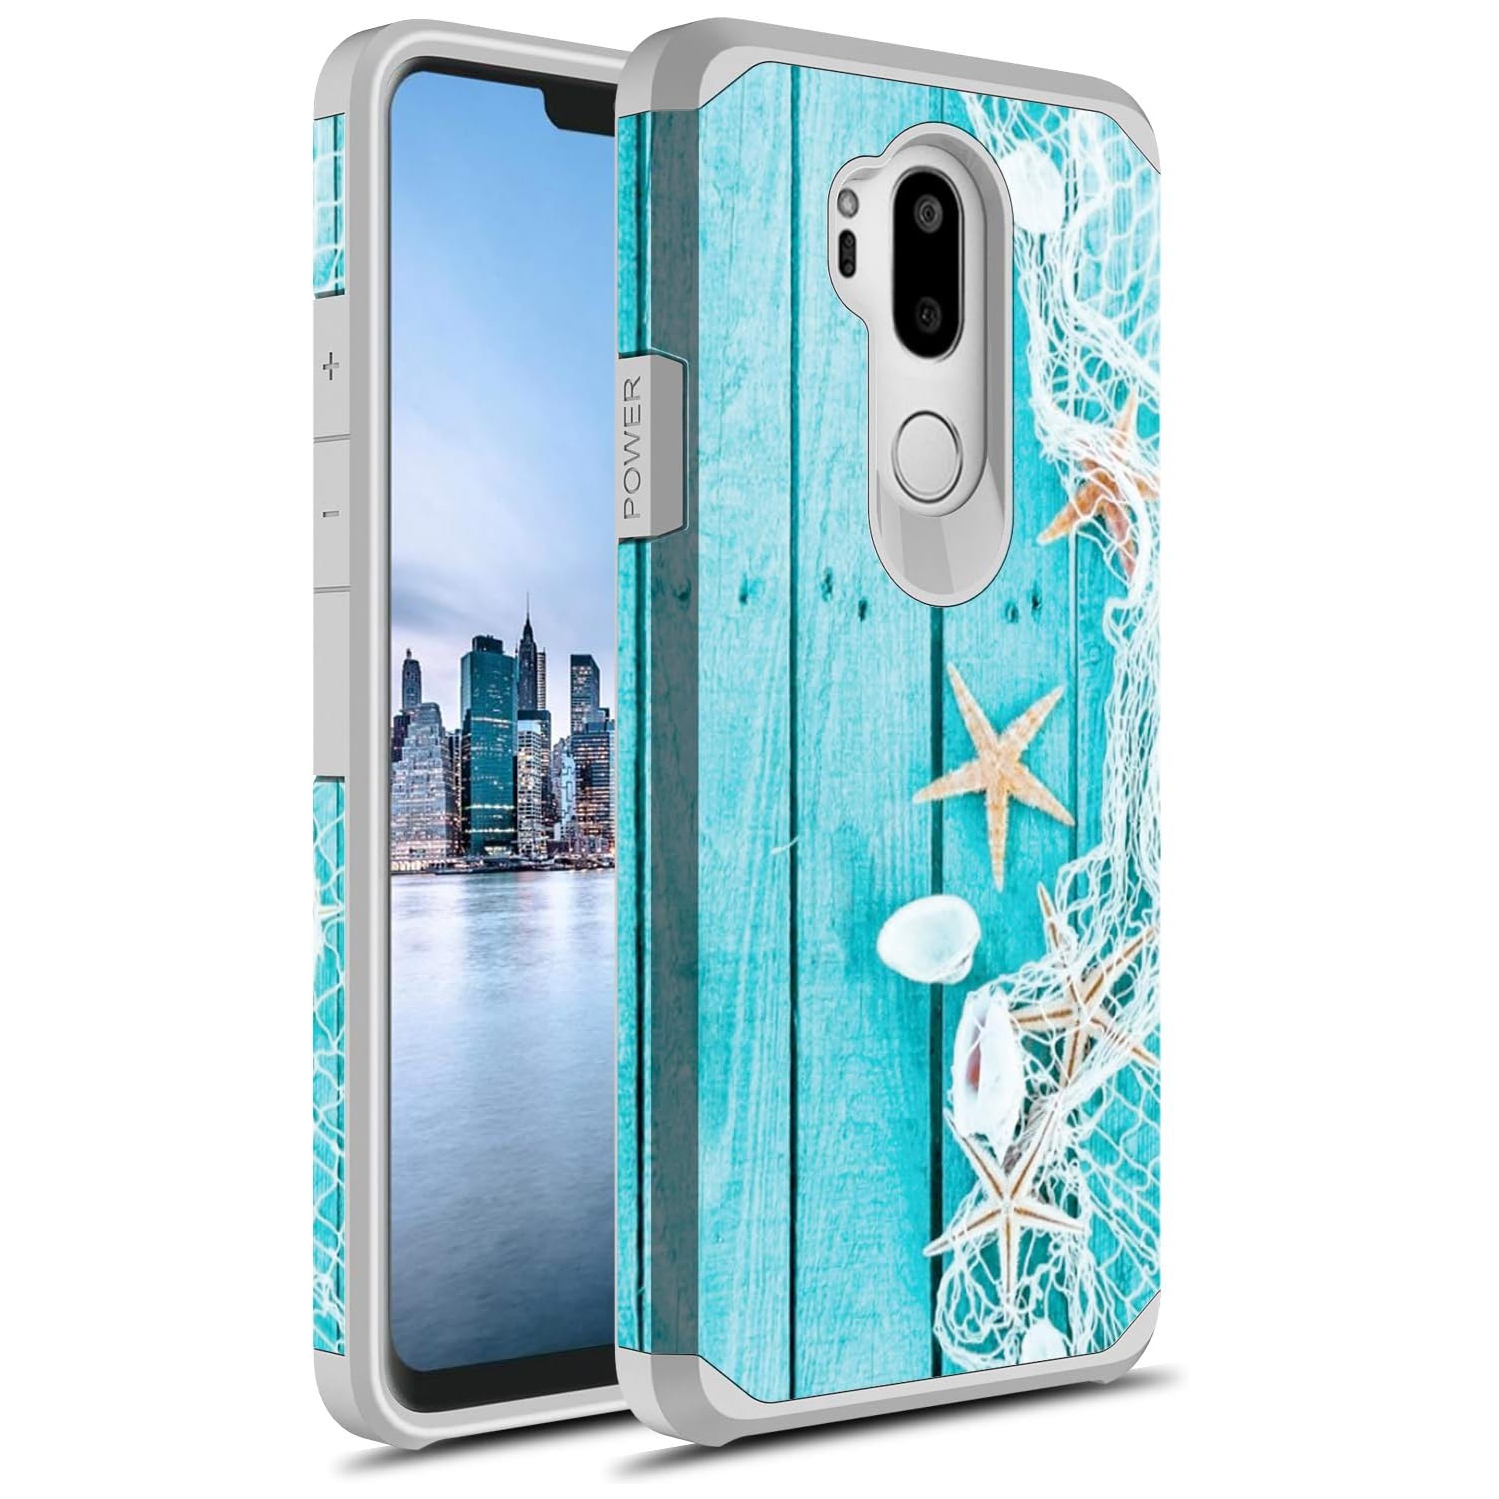 Rosebono for LG G7 Thinq Case, Slim Hybrid Dual Layer Shockproof Hard Cover Graphic Fashion Cute Colorful Silicone Skin